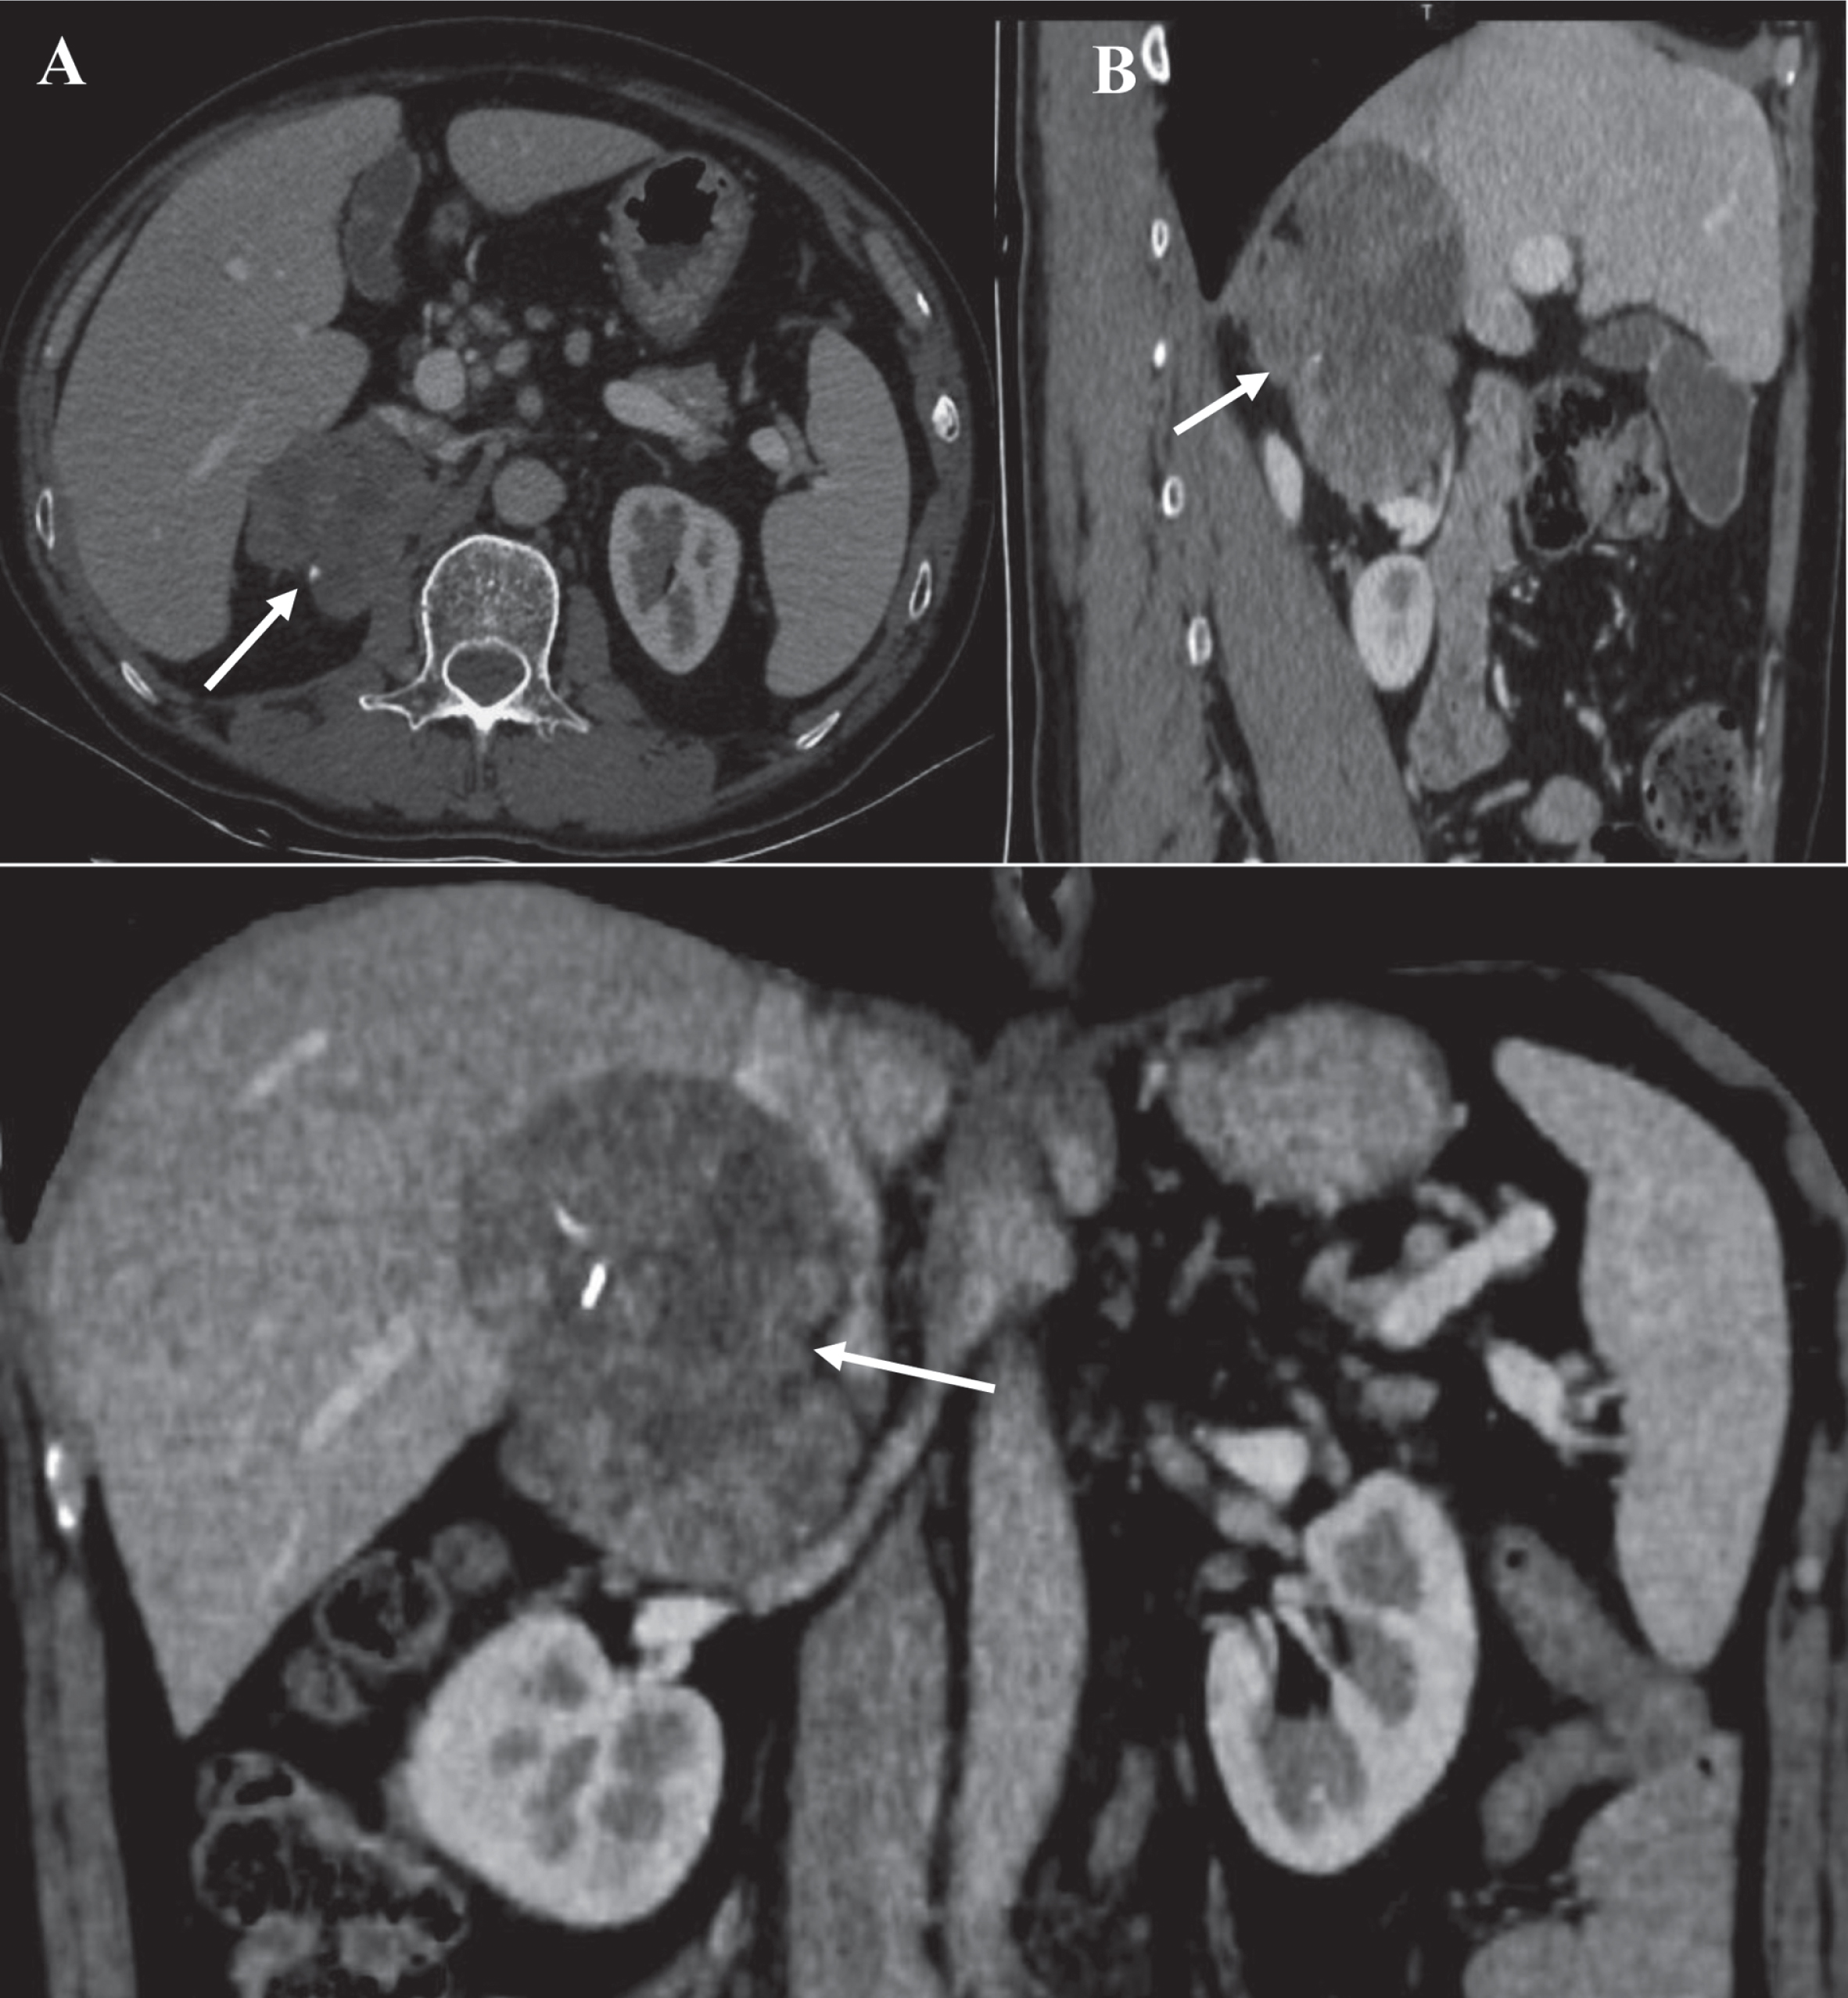 A larger tumor in right adrenal gland. Enhanced CT images submitted to doctor in regular pattern. (A) axial plane; (B) sagittal plane; (C) coronal plane. Arrow: ACC.